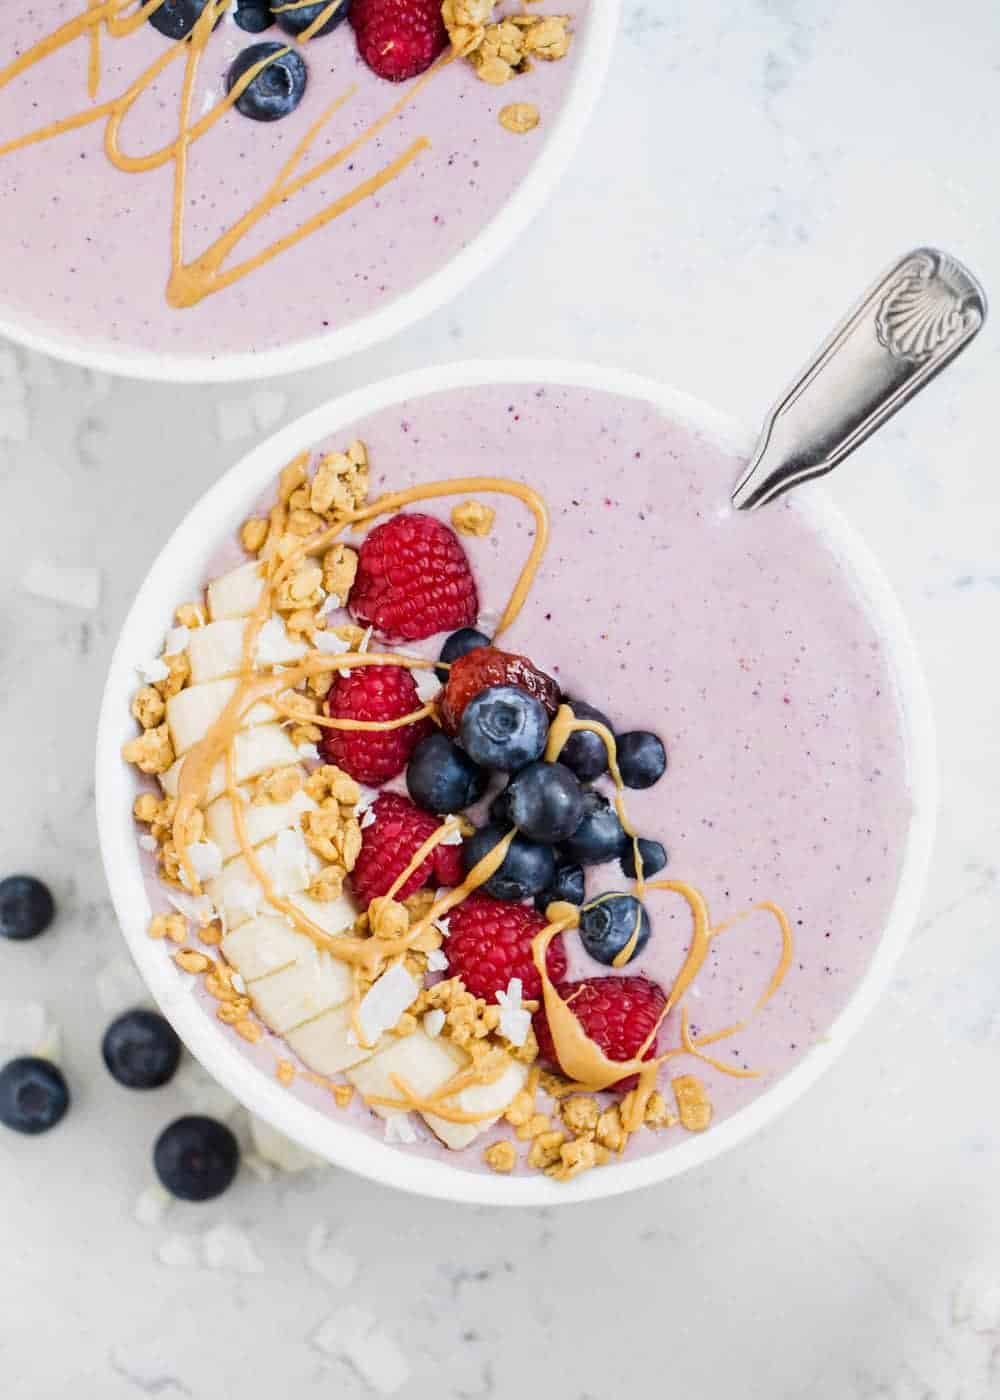 Smoothie in a white bowl.